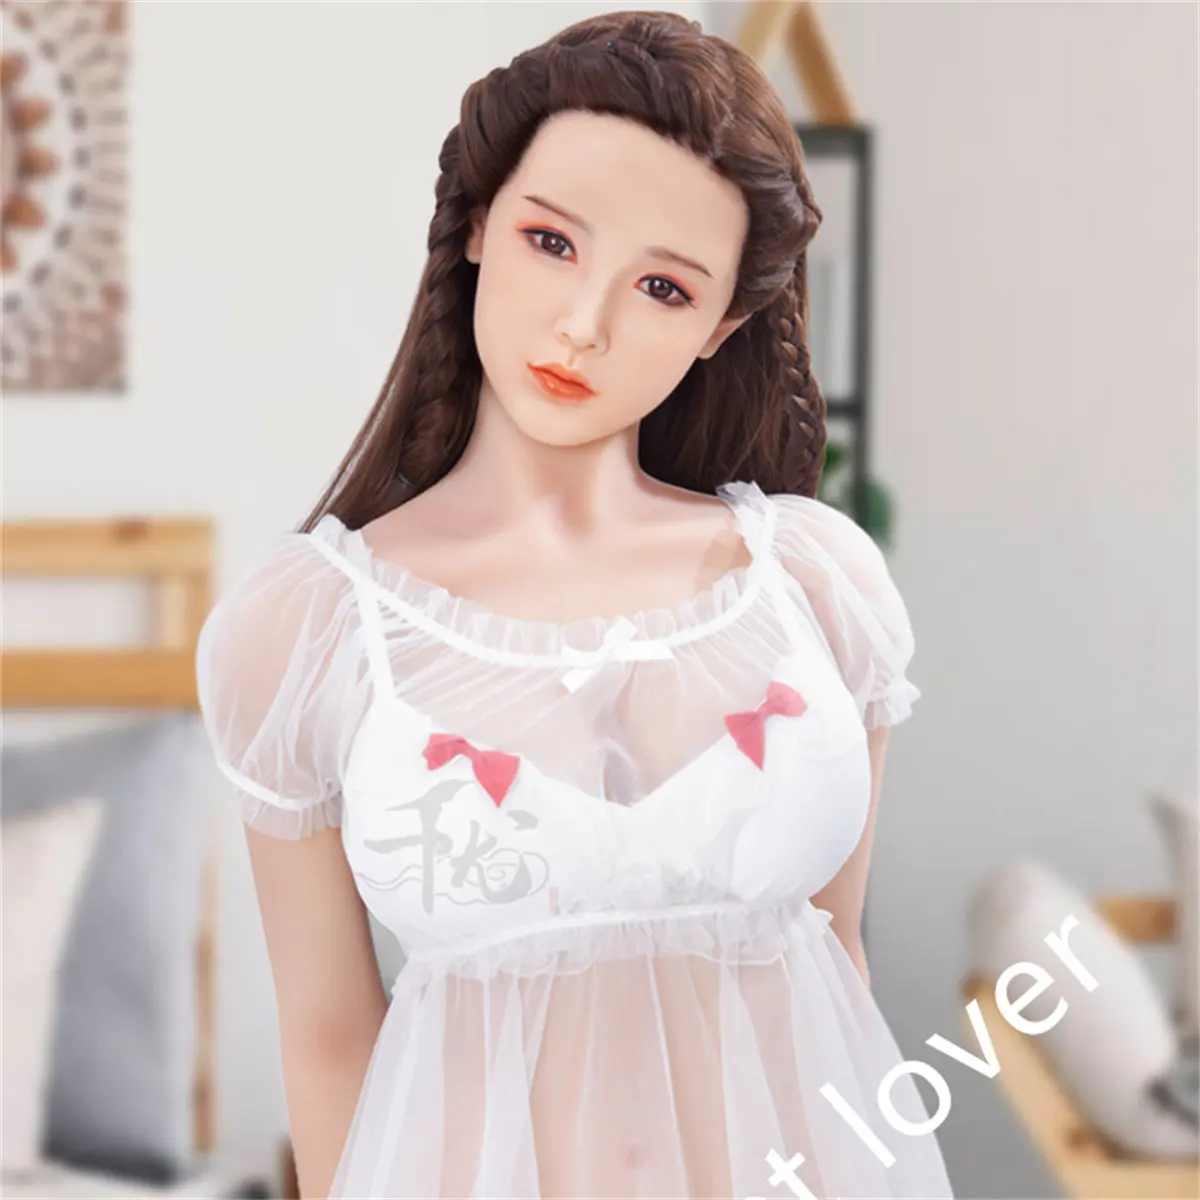 Tpe Doll Sex Dolll For Women Realistic Dick Athlete Sexy Dolls Male Sex Toy  160cm Sex Doll The Experience Is Super Comfortable - AliExpress